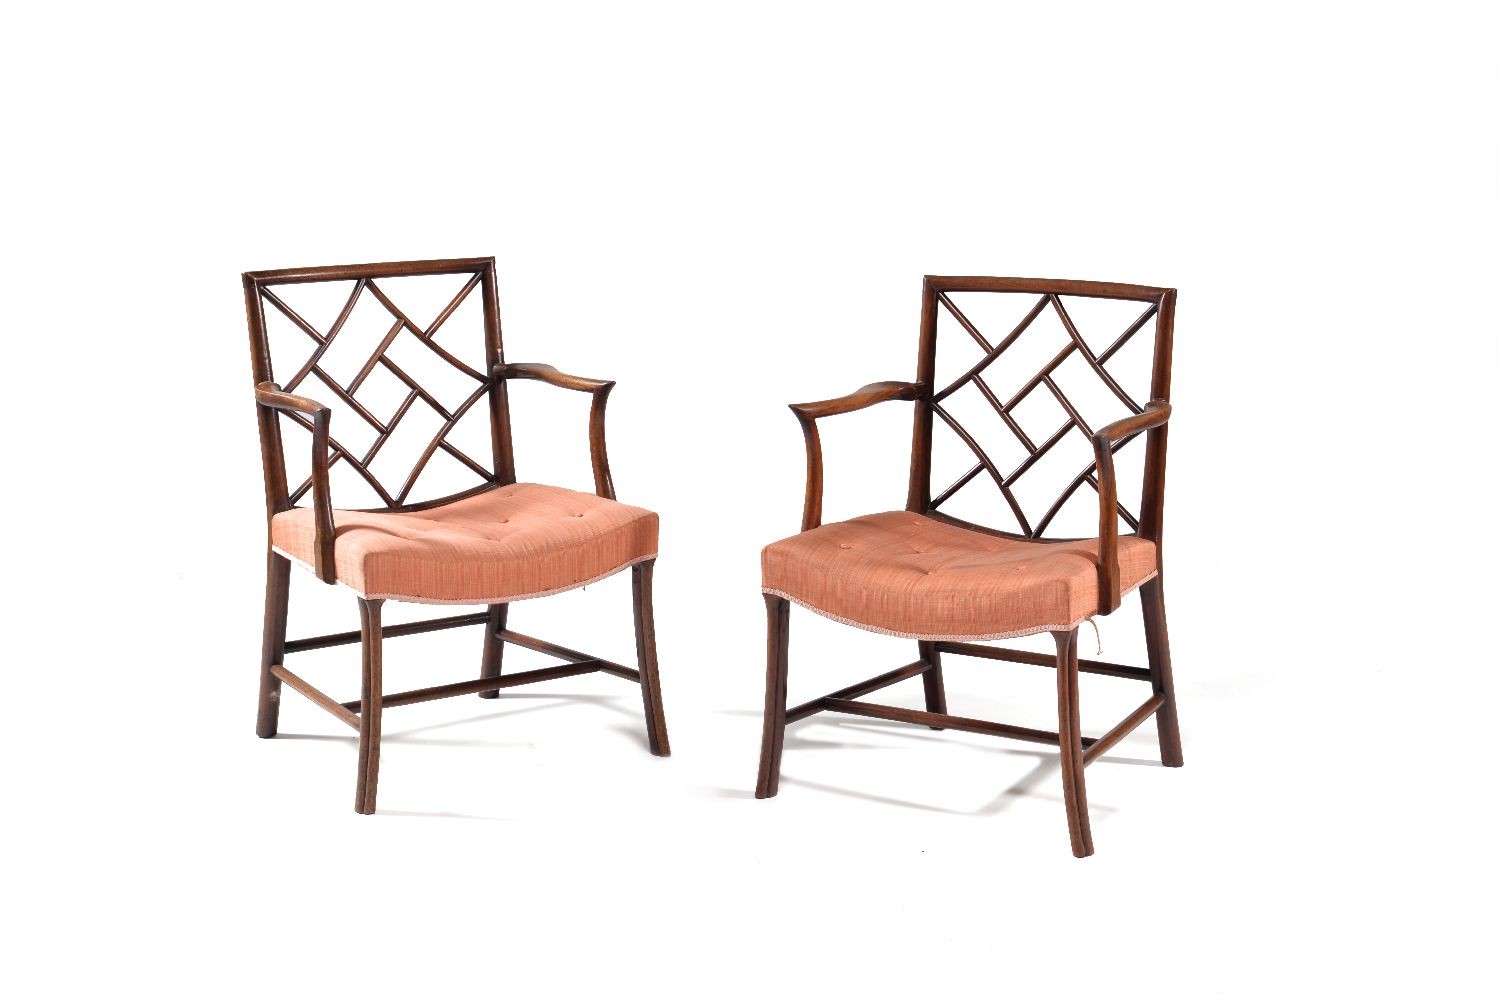 A pair of George III mahogany cock pen armchairs, late 18th century